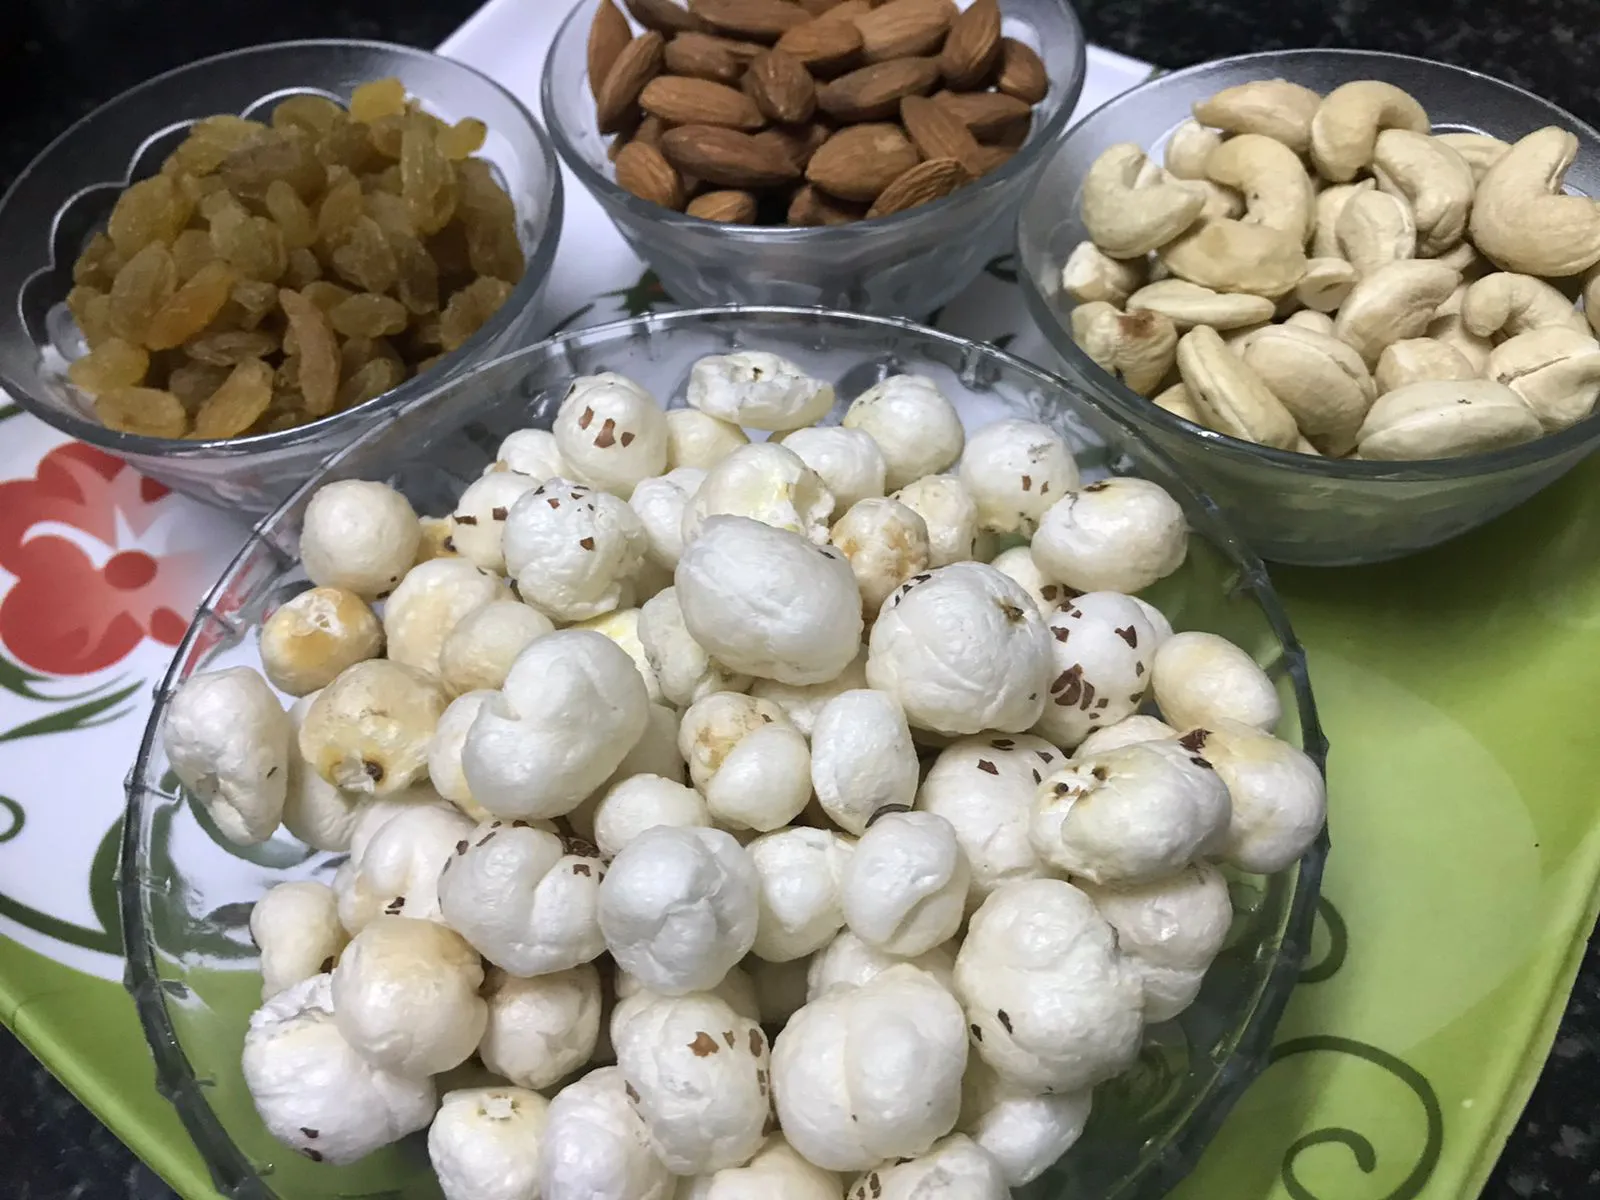 Bowls with different dry fruits and makhana in a plate